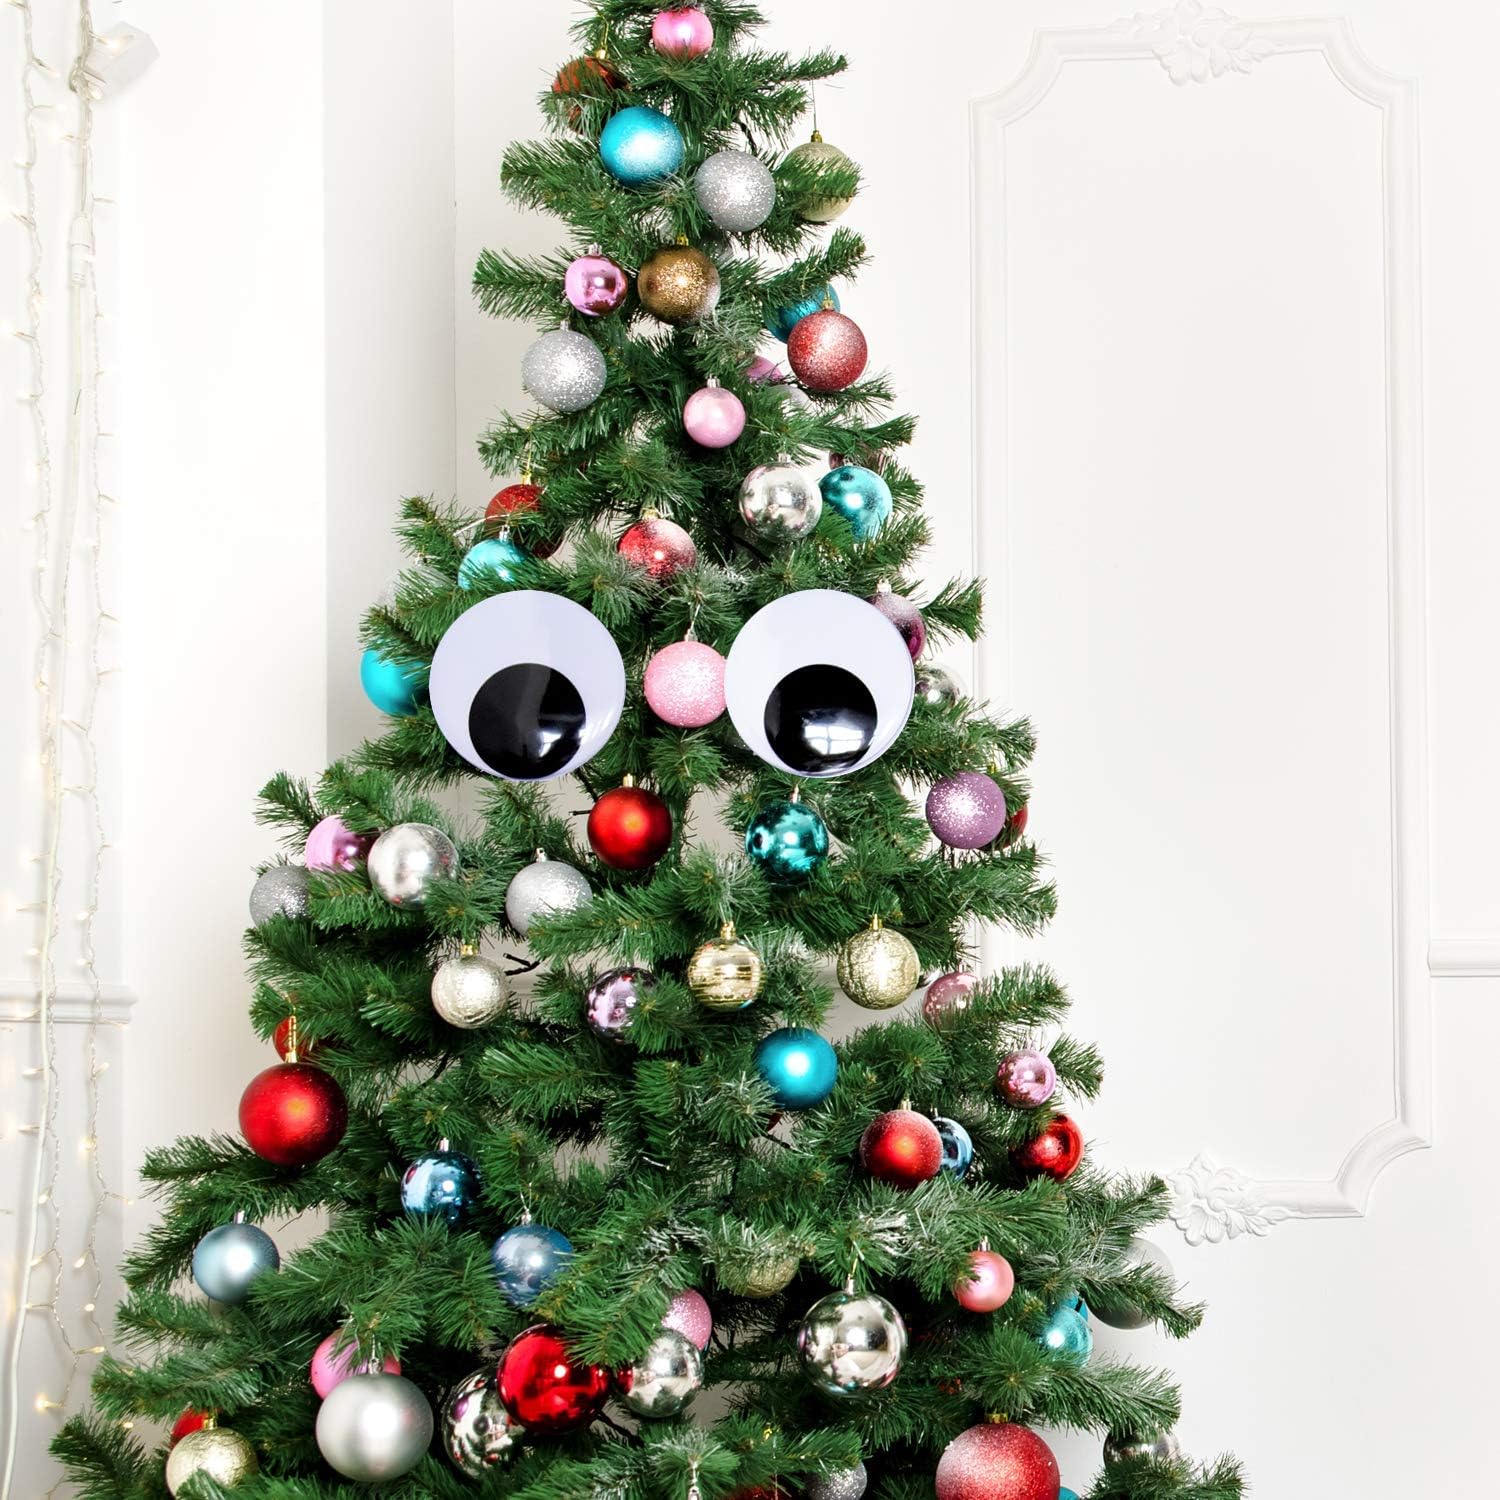 DIYASY 2 inch 3 inch 4 inch Large Googly Wiggle Eyes with Self-Adhesive 8 Pcs for Christmas Decorations